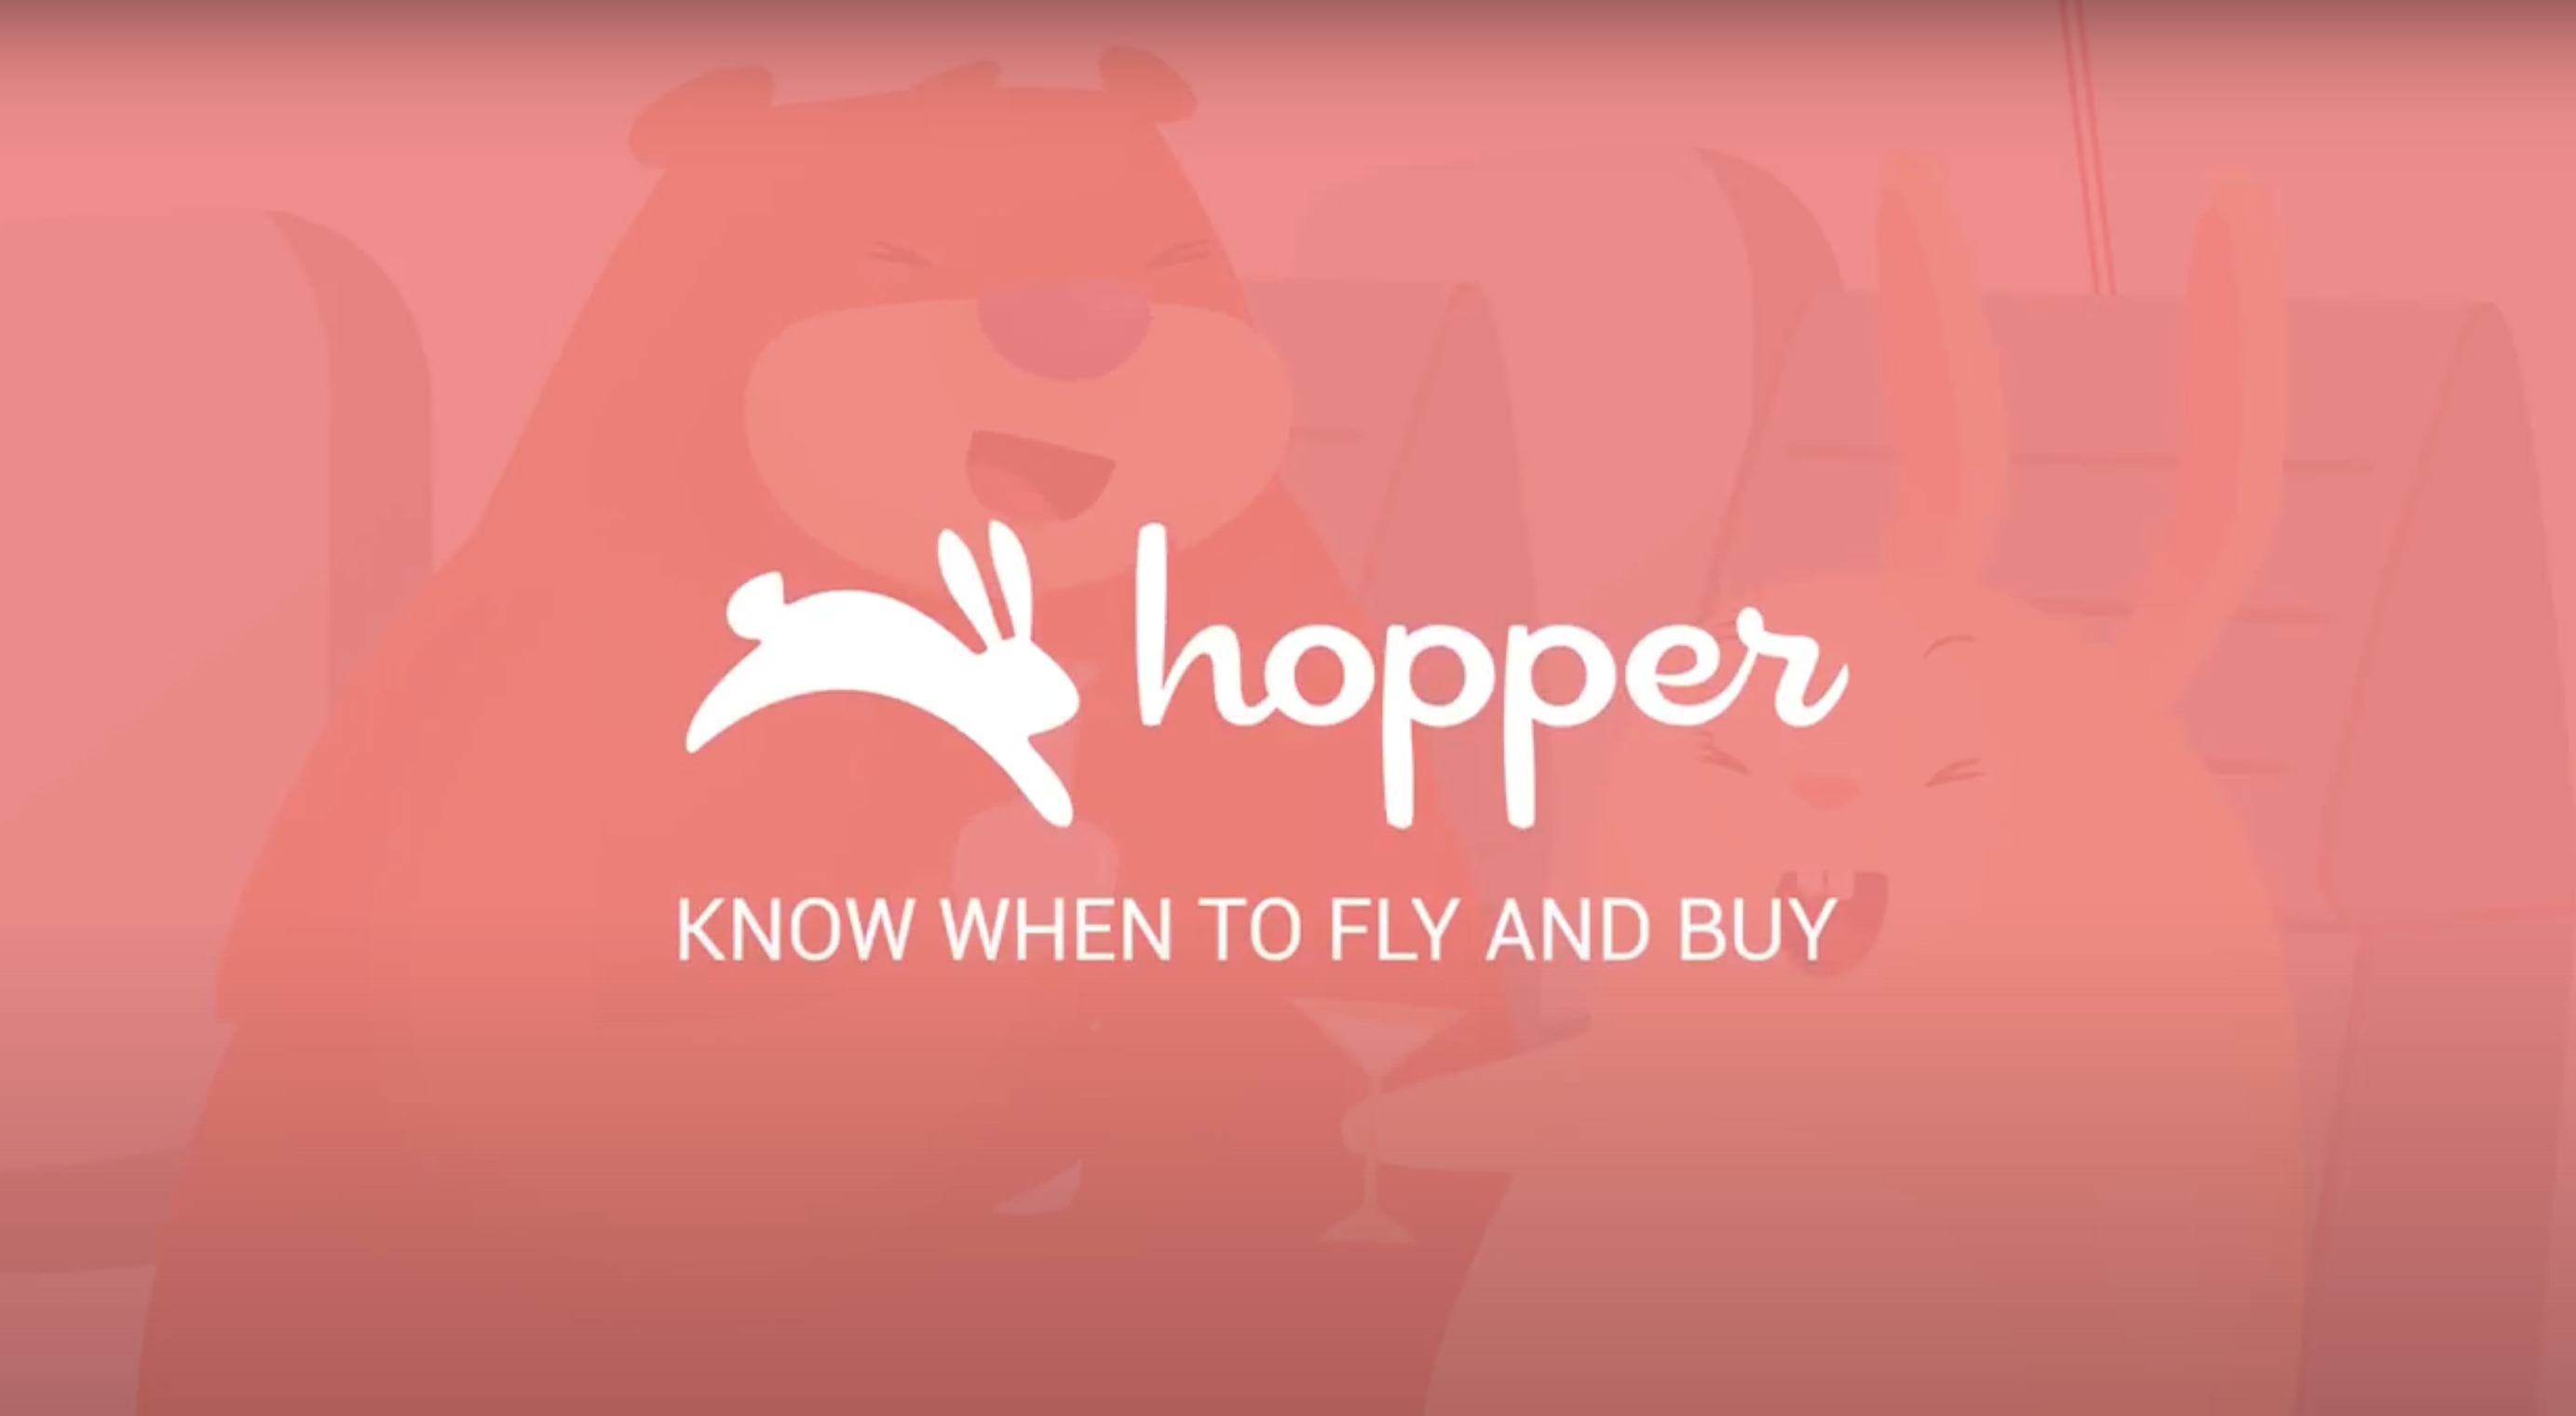 How To Contact Support In Hopper App | Get The Complete Details